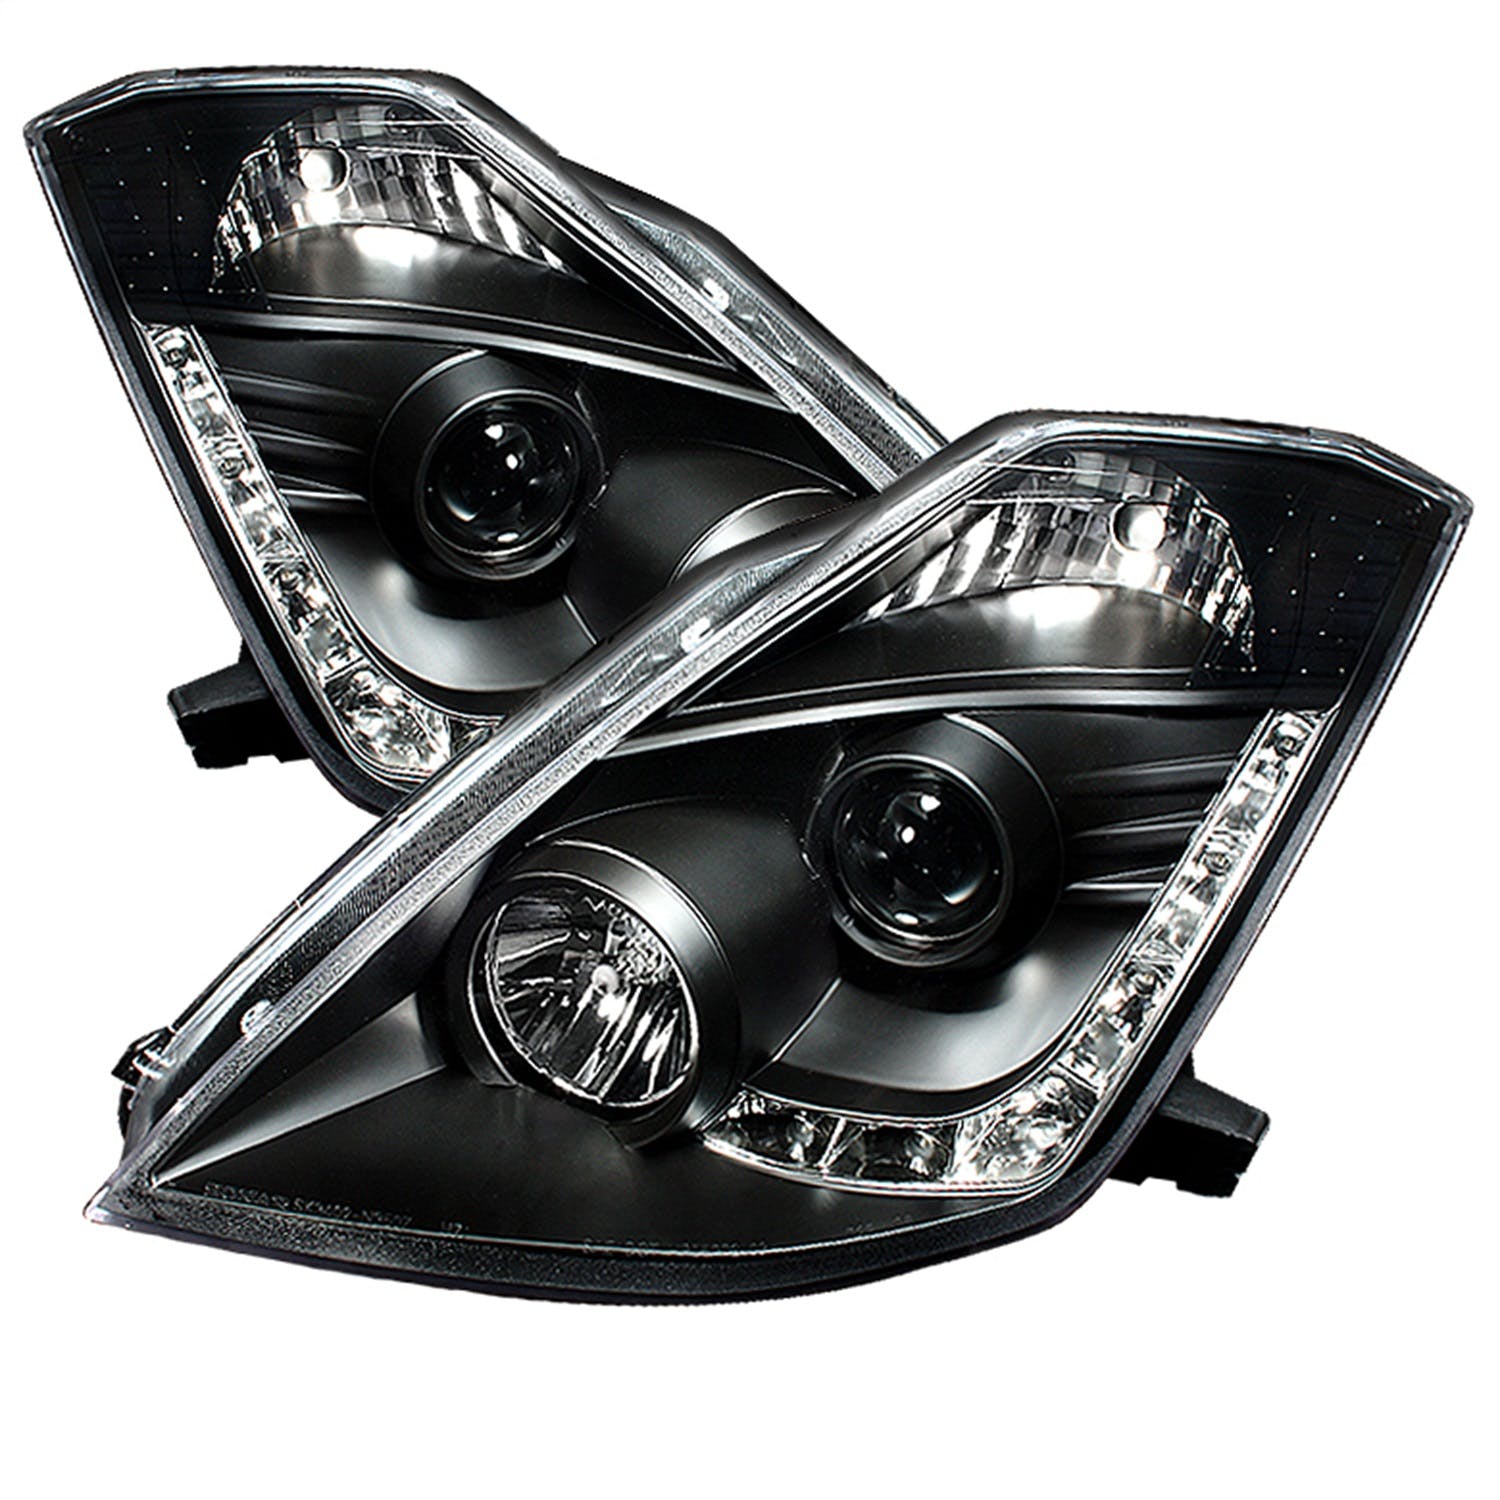 Spyder Auto 5032225 (Spyder) Nissan 350Z 03-05 Projector Headlights-Xenon/HID Model Only ( Not Compa